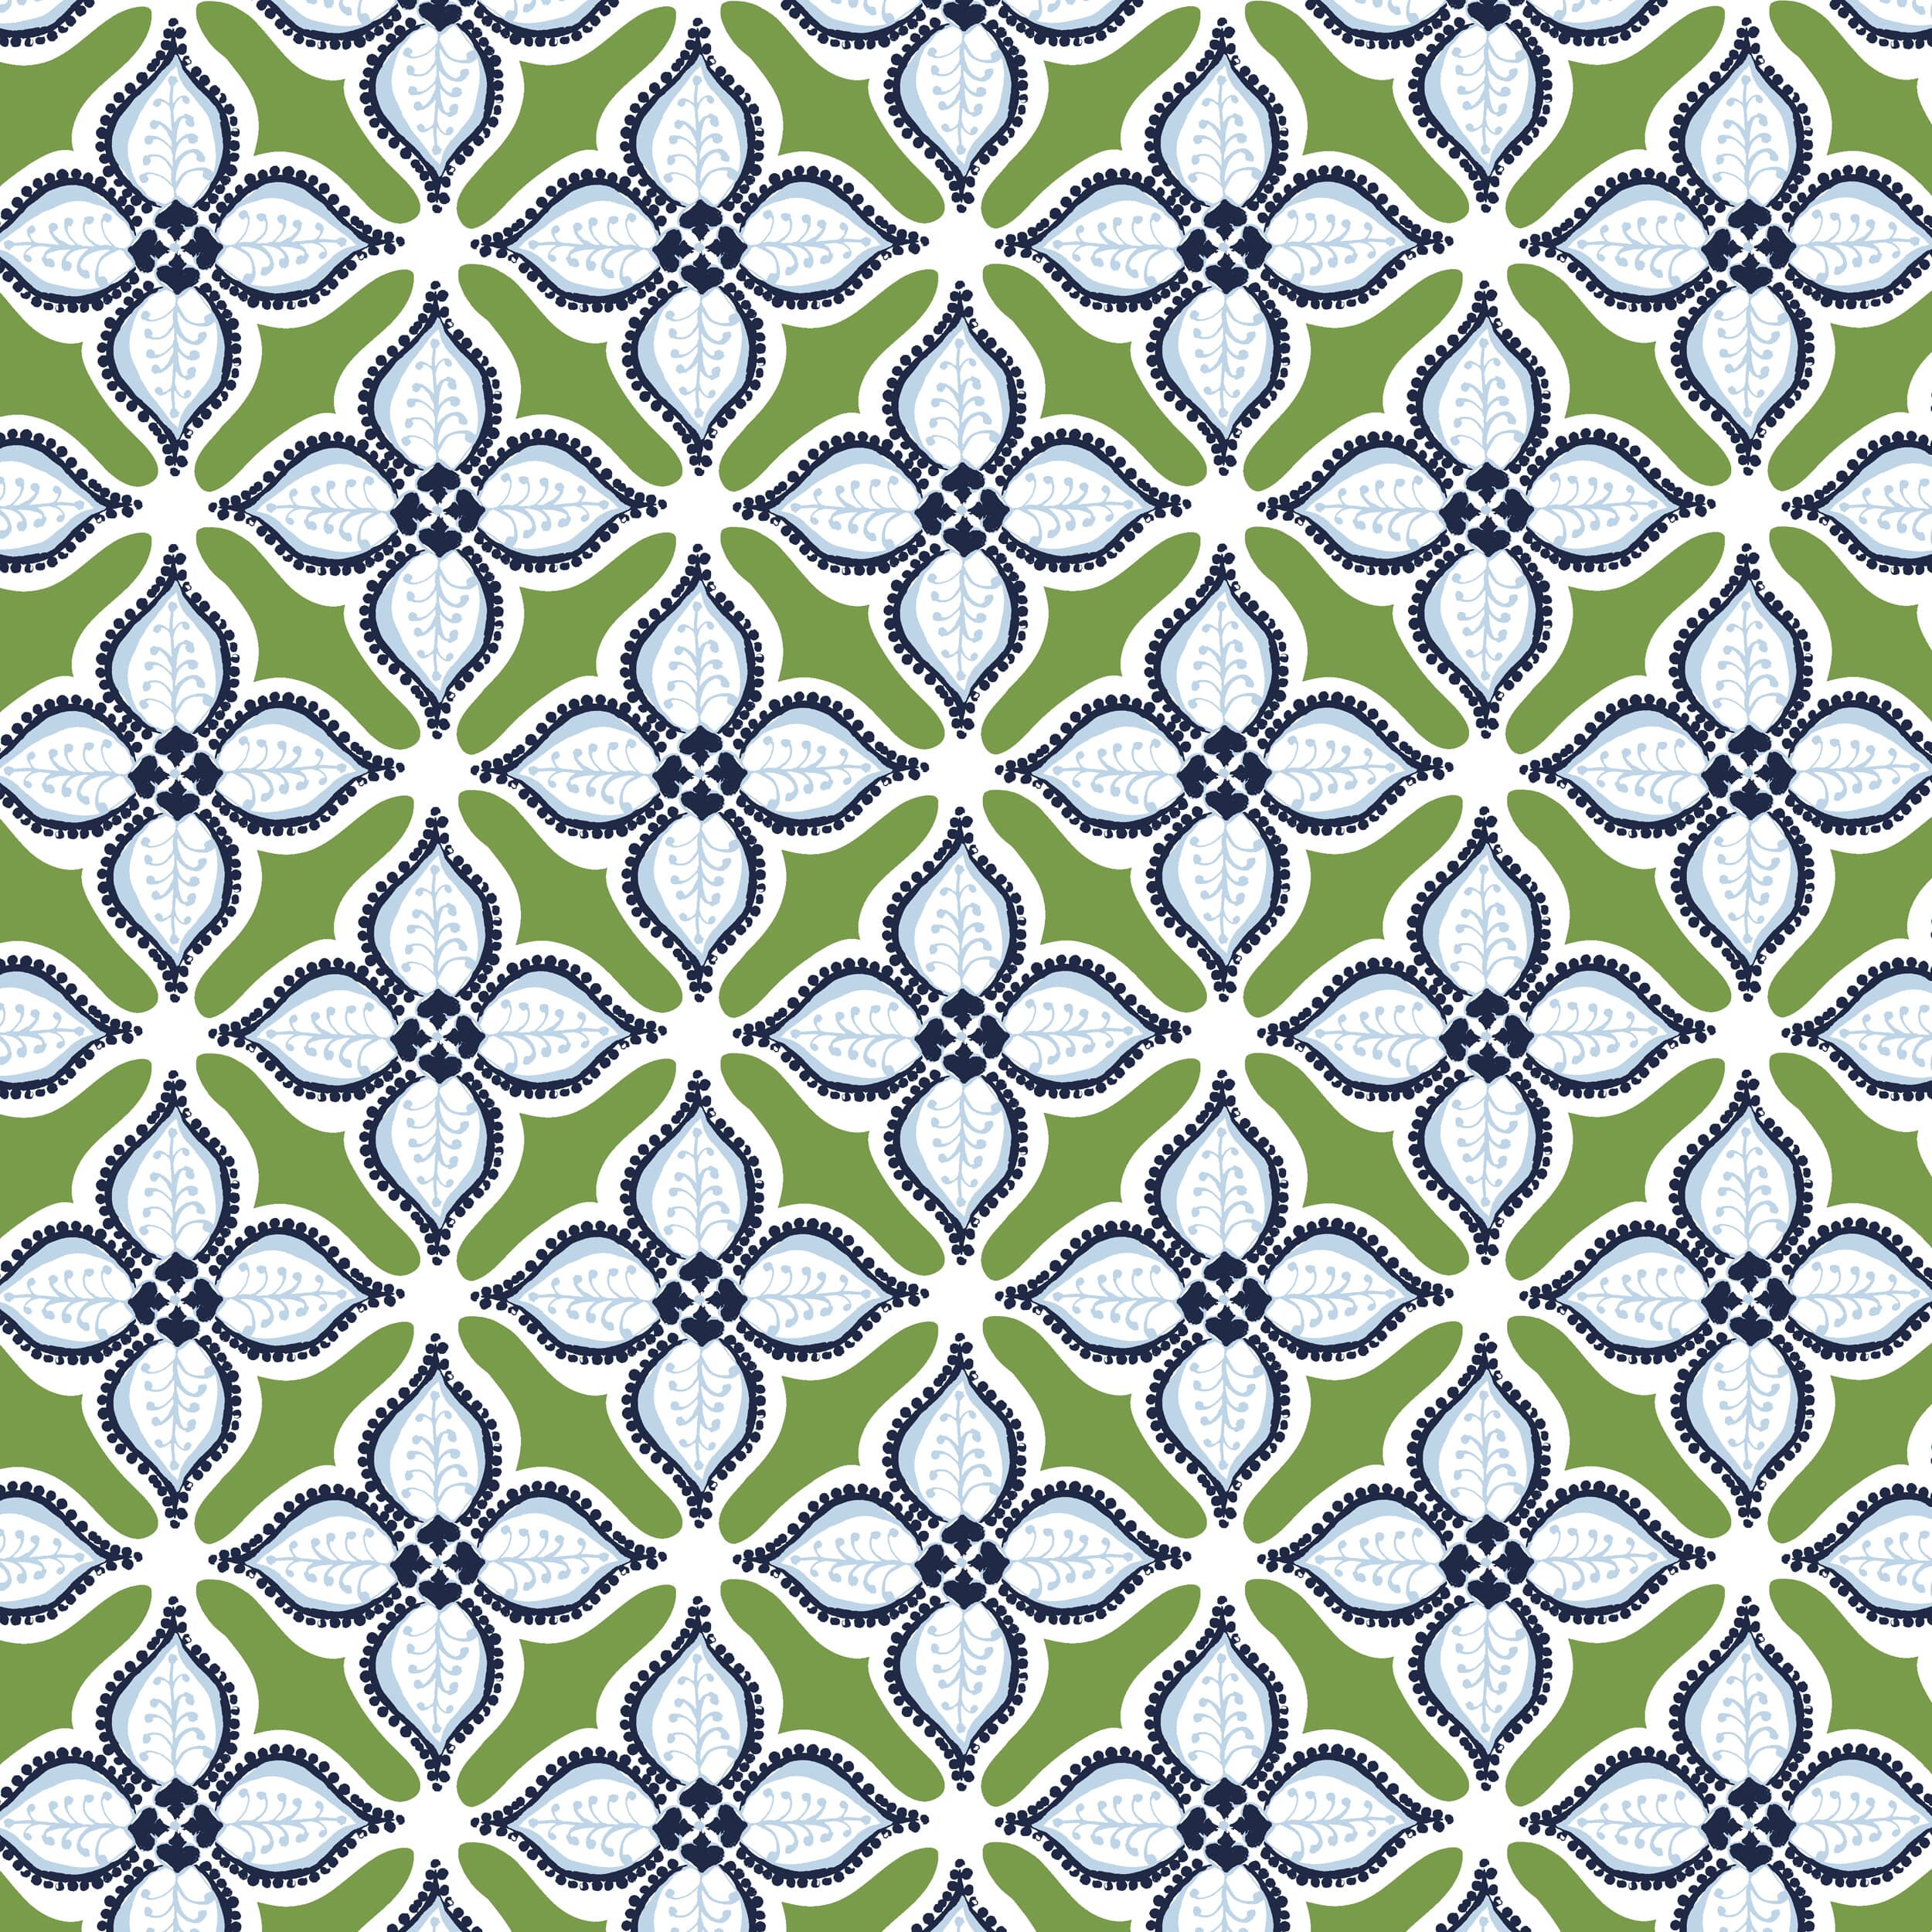 W03vl-2 Glimmer Grass Wallpaper by Stout Fabric